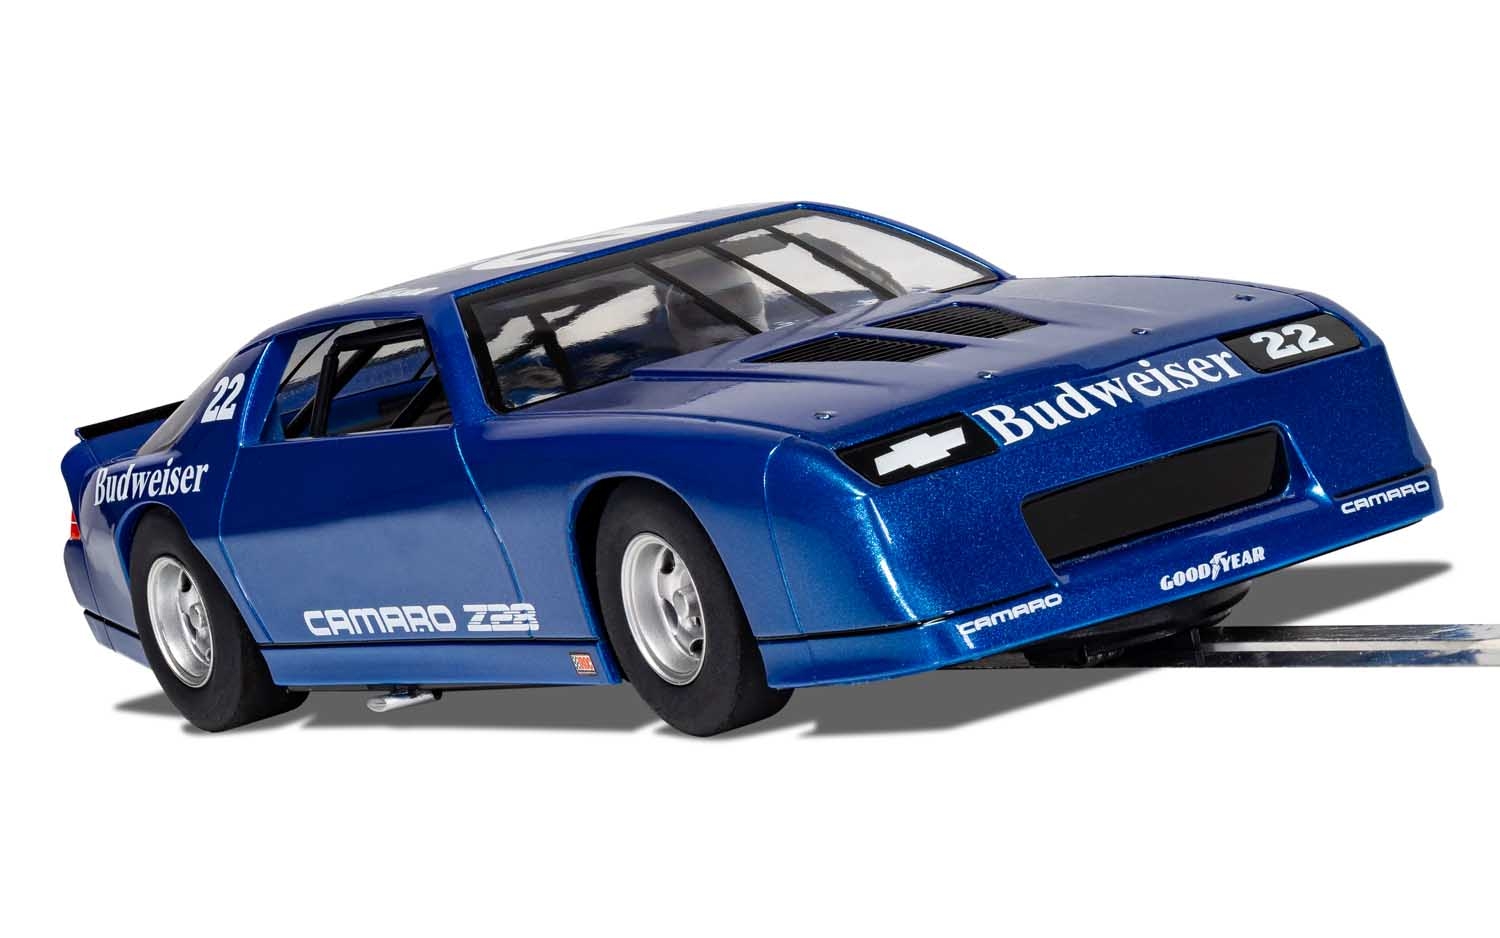 1/32 scale slot car decals for the Scalextric IROC Camaro 